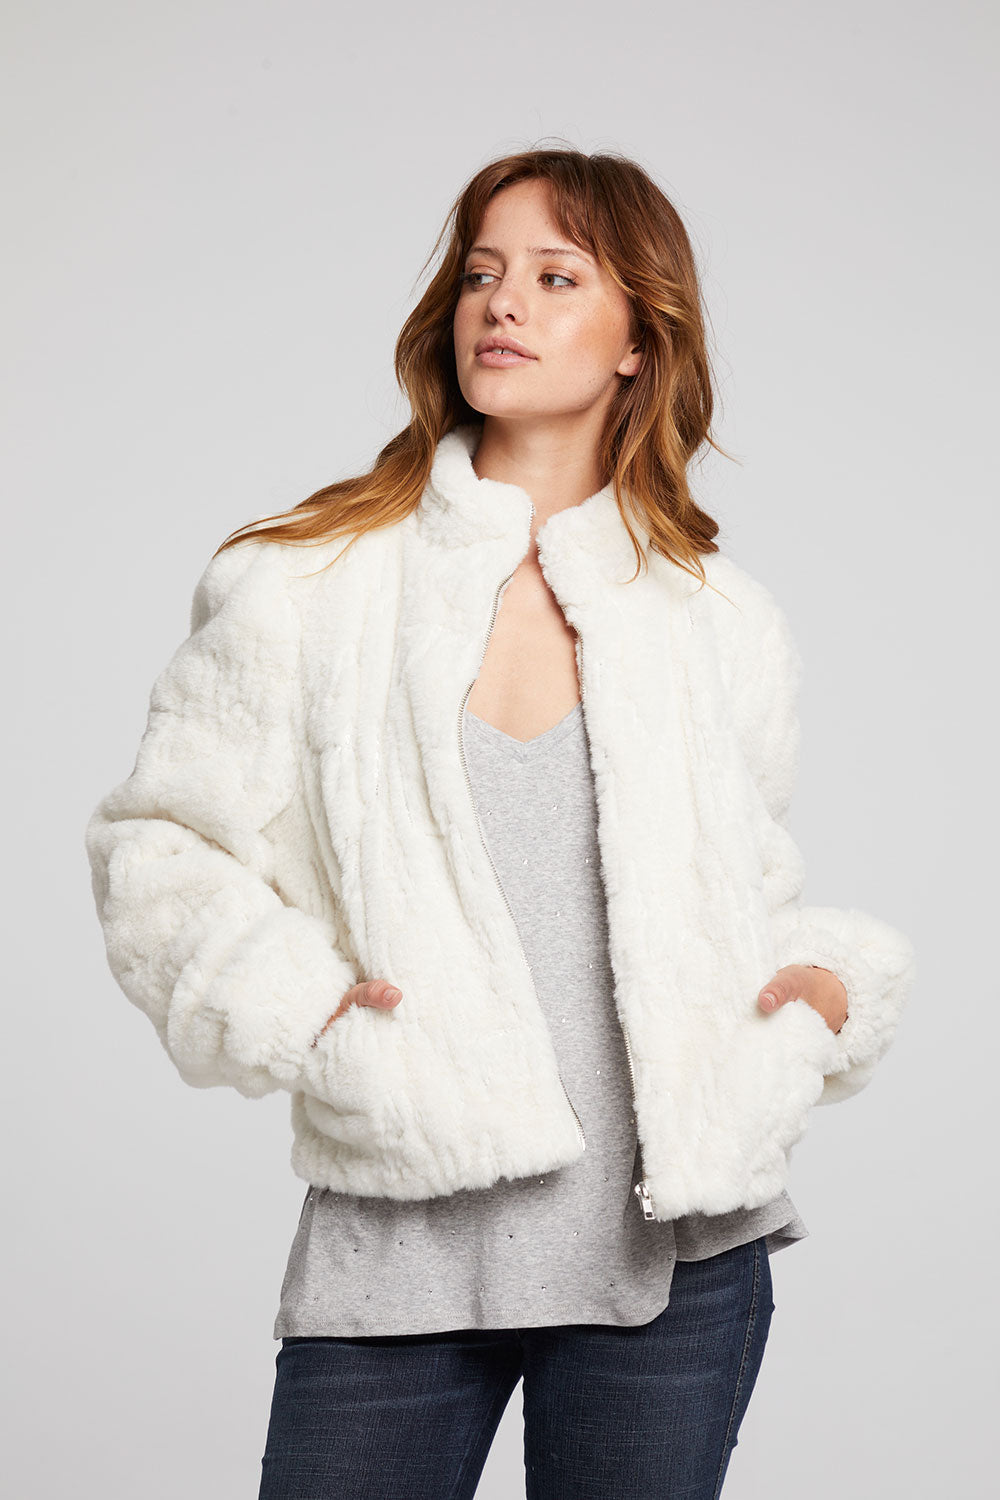 chaser-starry-white-faux-fur-jacket-07